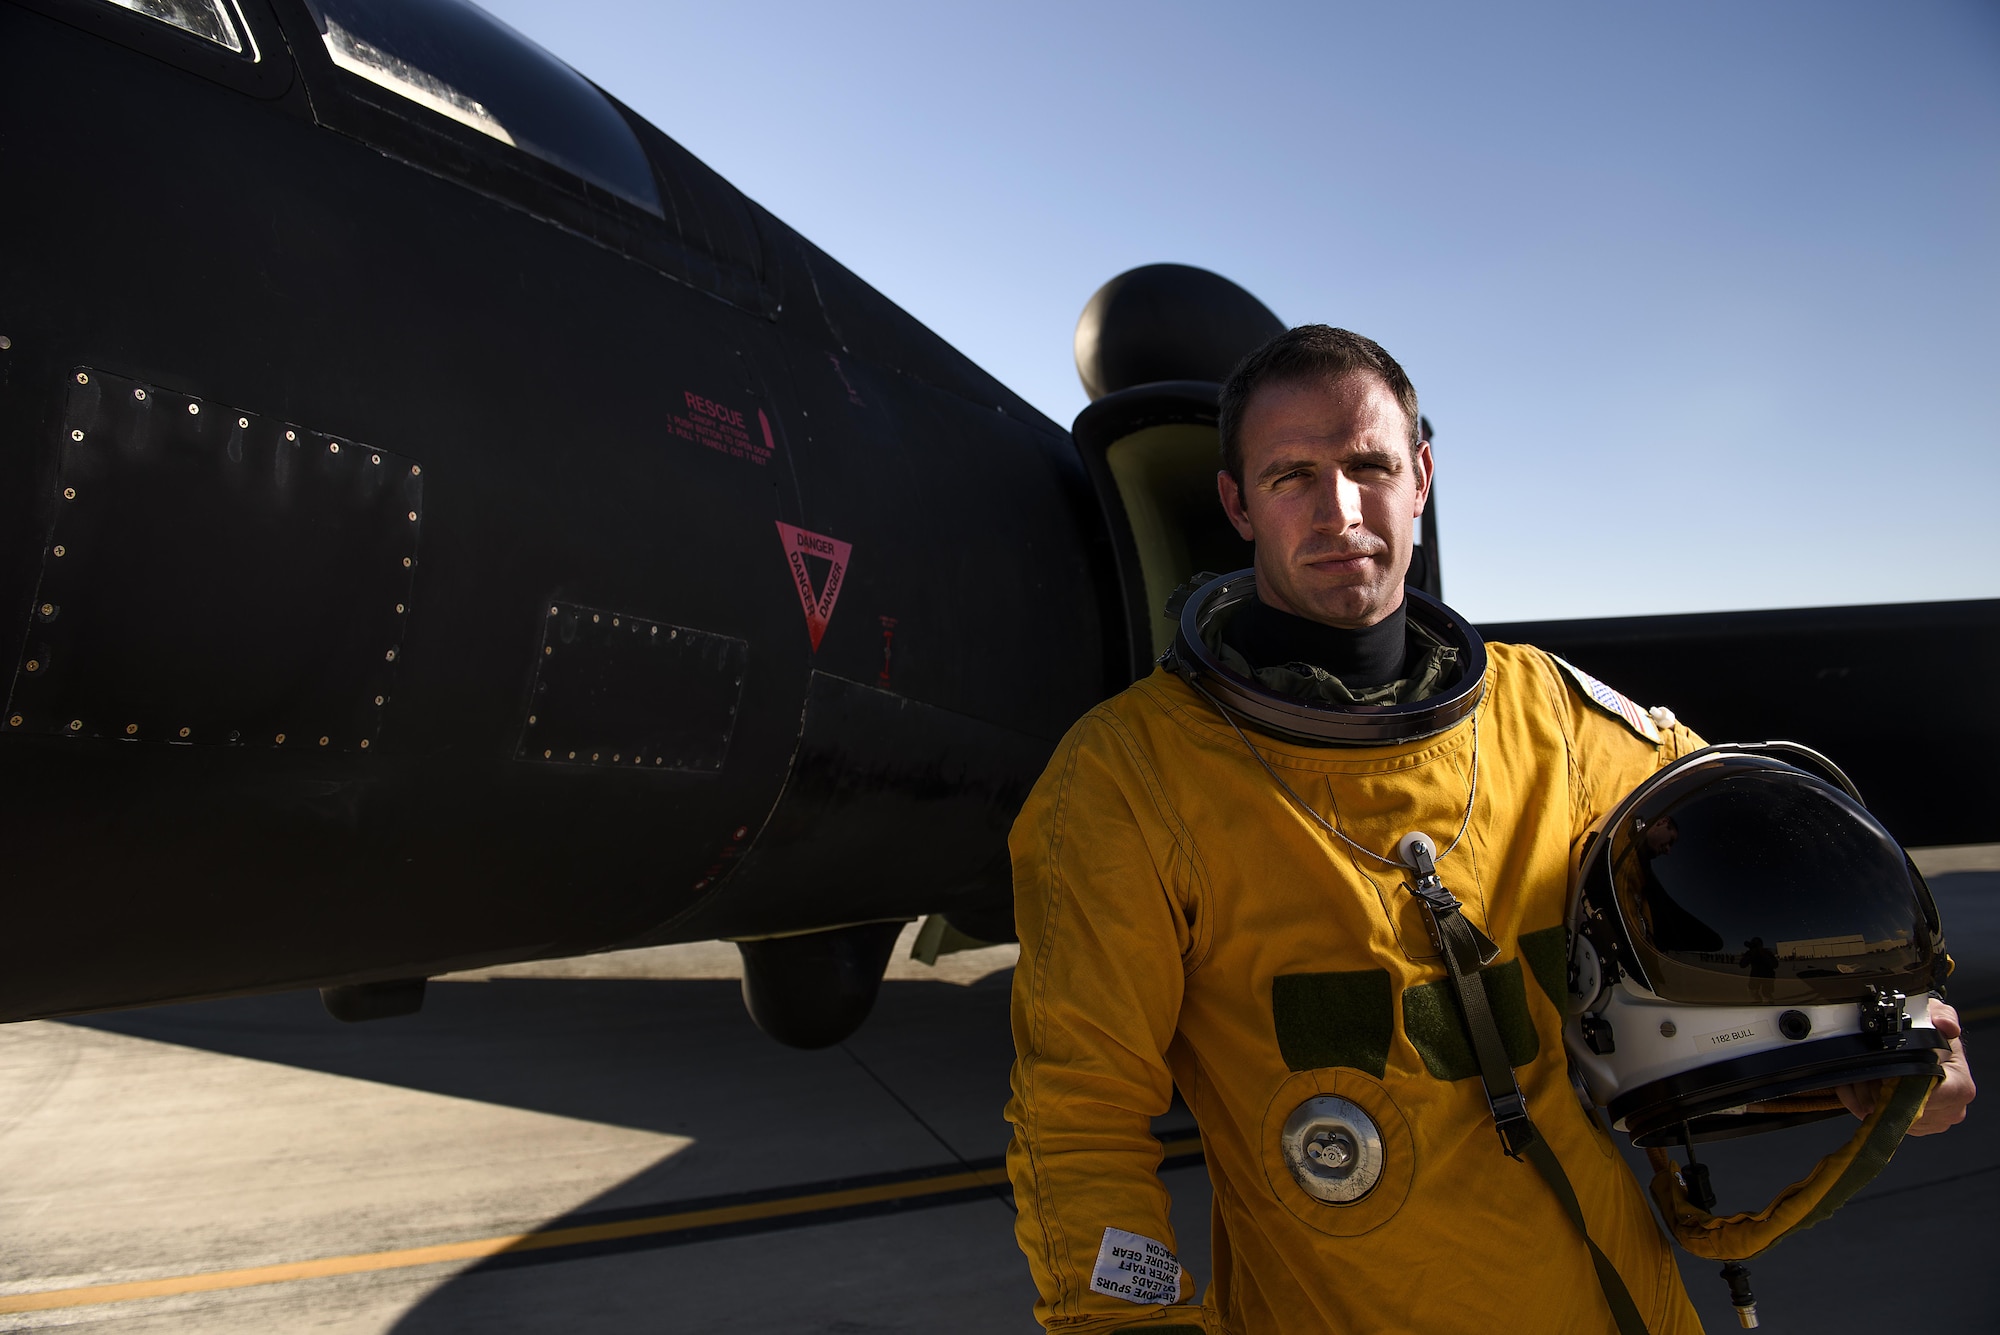 Capt. Arthur Bull, a U-2 pilot from 99th Reconnaissance Squadron, in his pressured space suit at Nellis Air Force Base, Nevada during exercise Red Flag. Airmen from Beale Air Force Base, California traveled out to Red Flag for the fist time since the mid 1990s--typically the aircraft flies exercise missions out of their home station. Red Flag 16-3 is aimed at teaching service members how to integrate air, space and cyberspace elements. (U.S. Air Force photo/Tech. Sgt. David Salanitri)